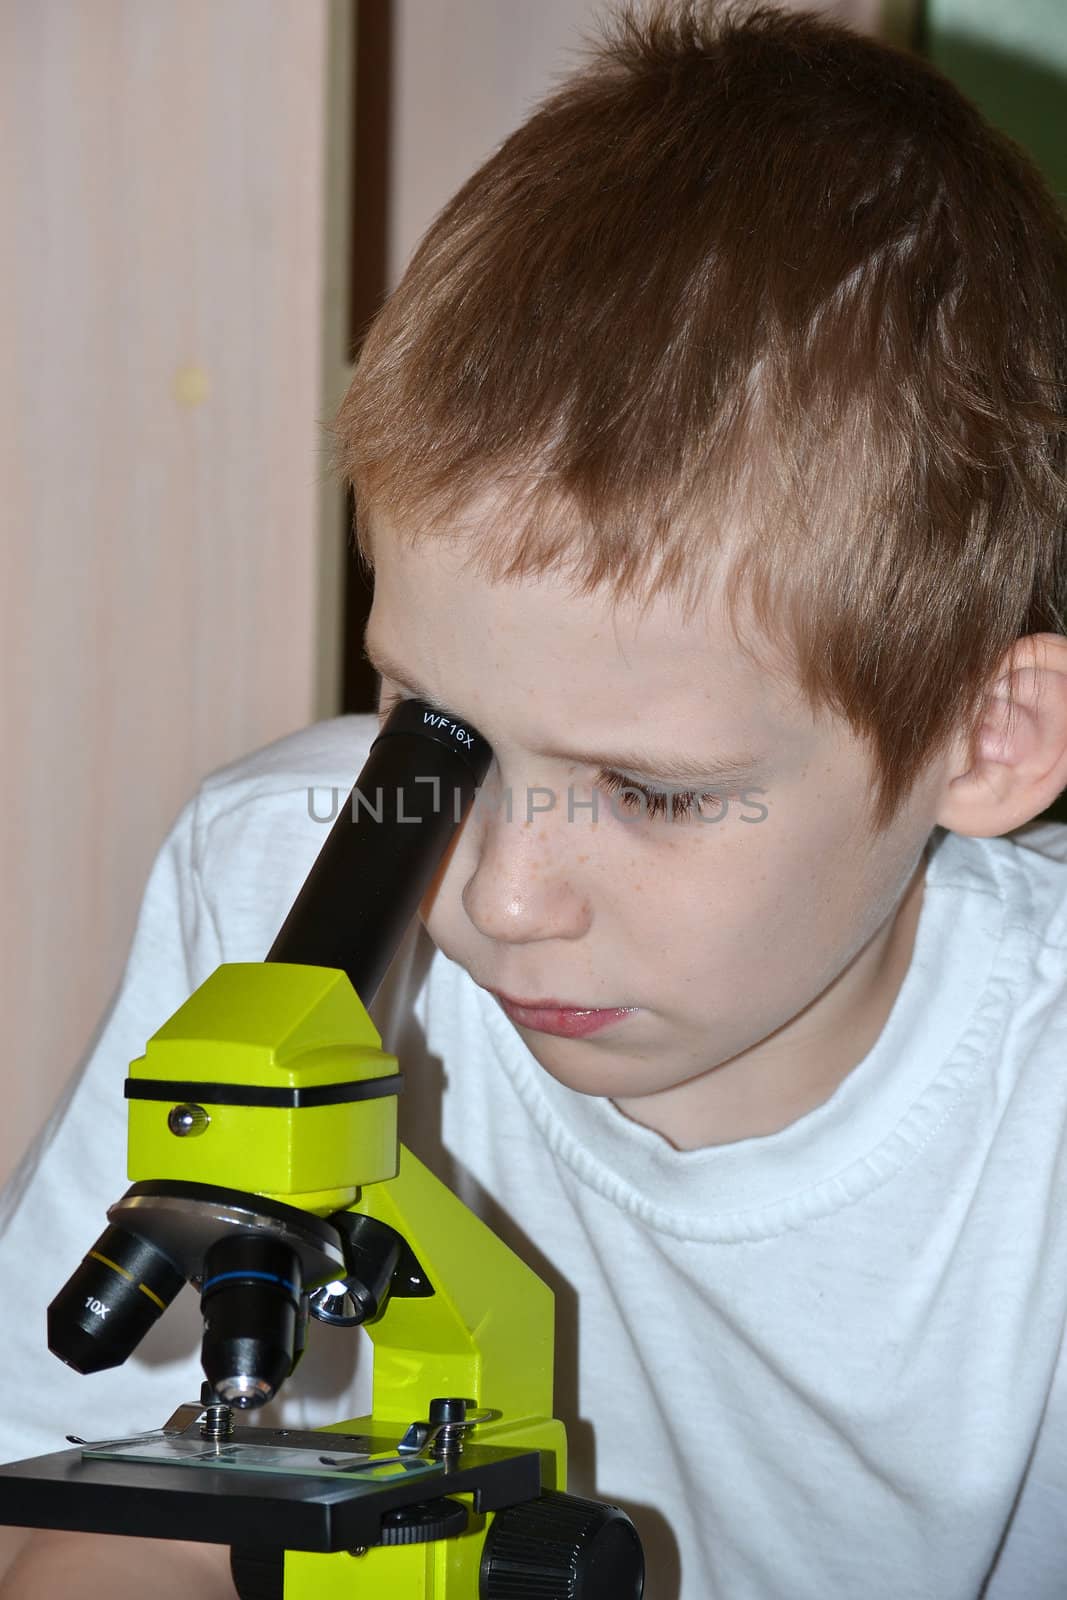 The teenager conducts researches, looking in a microscope